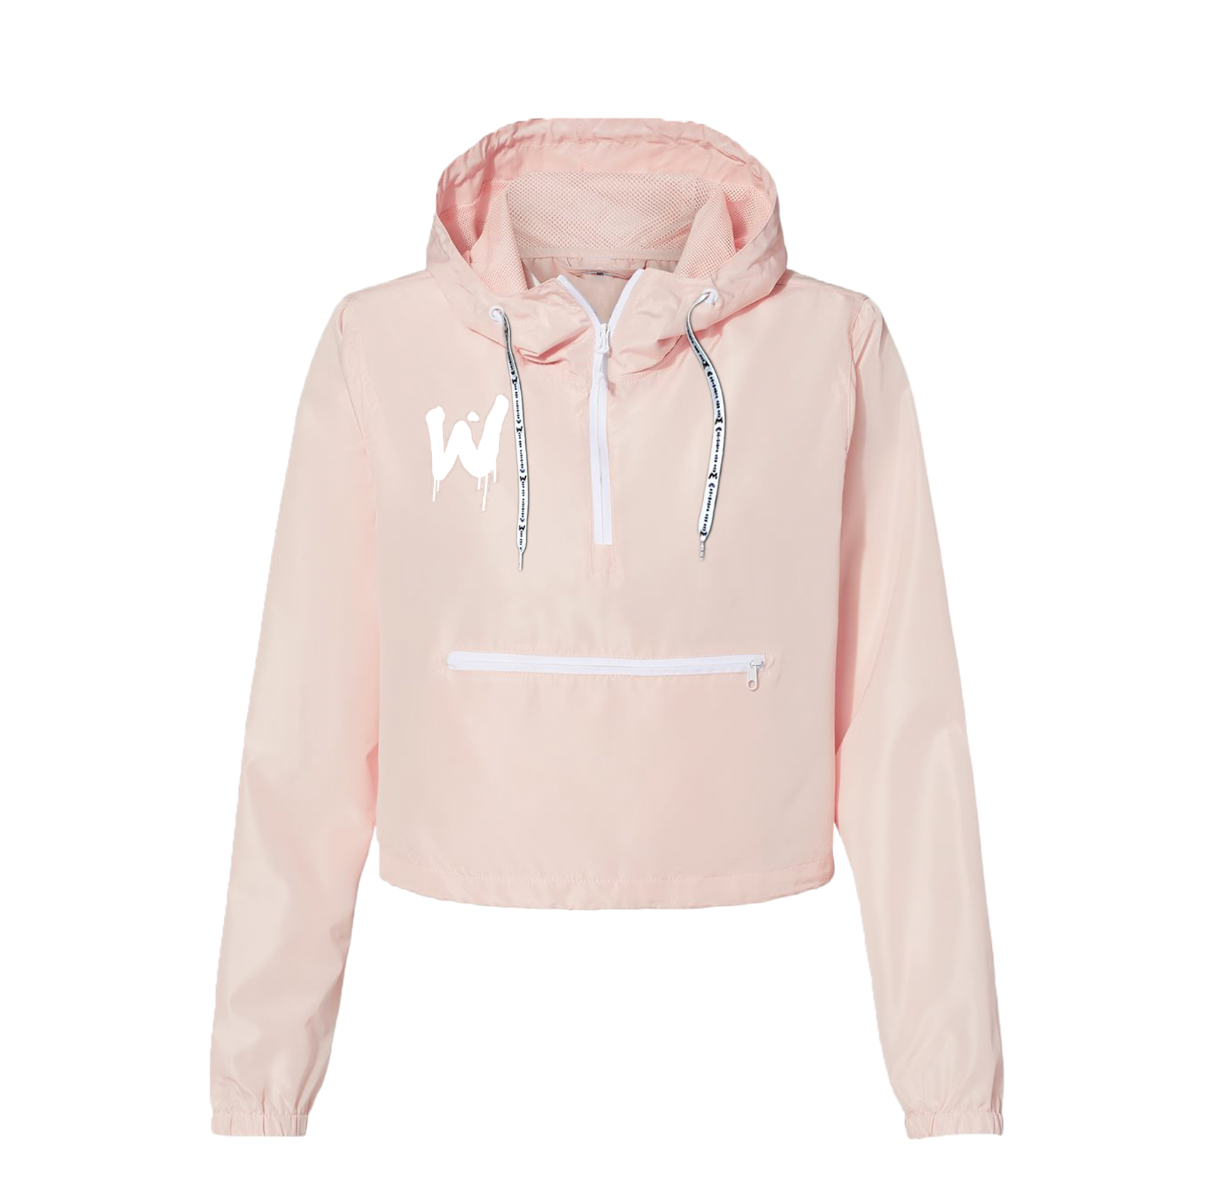 Drippy W, Embroidery, Womens, Streetwear, Streetstyle, Drip, Embroidered, womens, luxury clothing, high quality clothing, summer vibes, stay wavy my friends , #portland, santorini , Greece, drippy , swag 